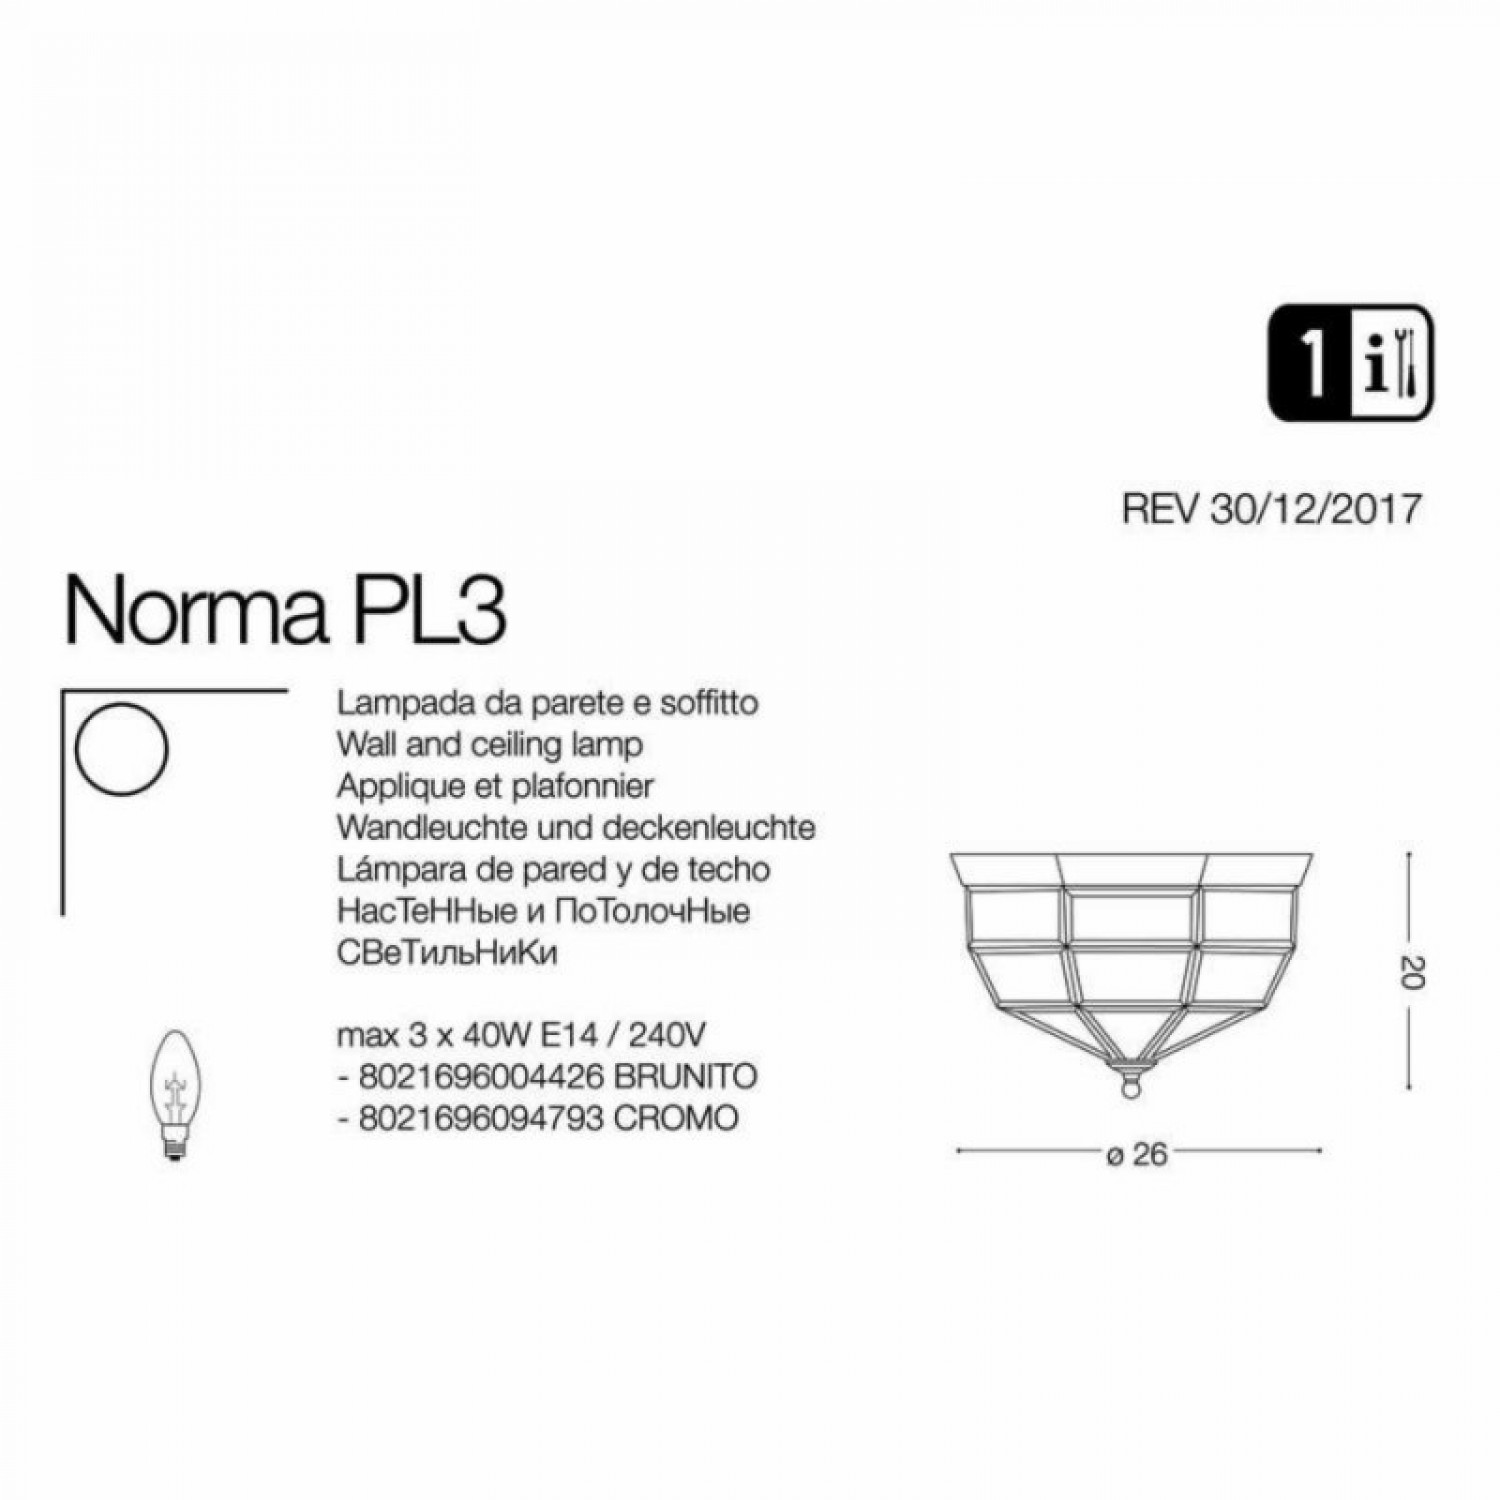 Люстра Ideal Lux NORMA PL3 BRUNITO 004426